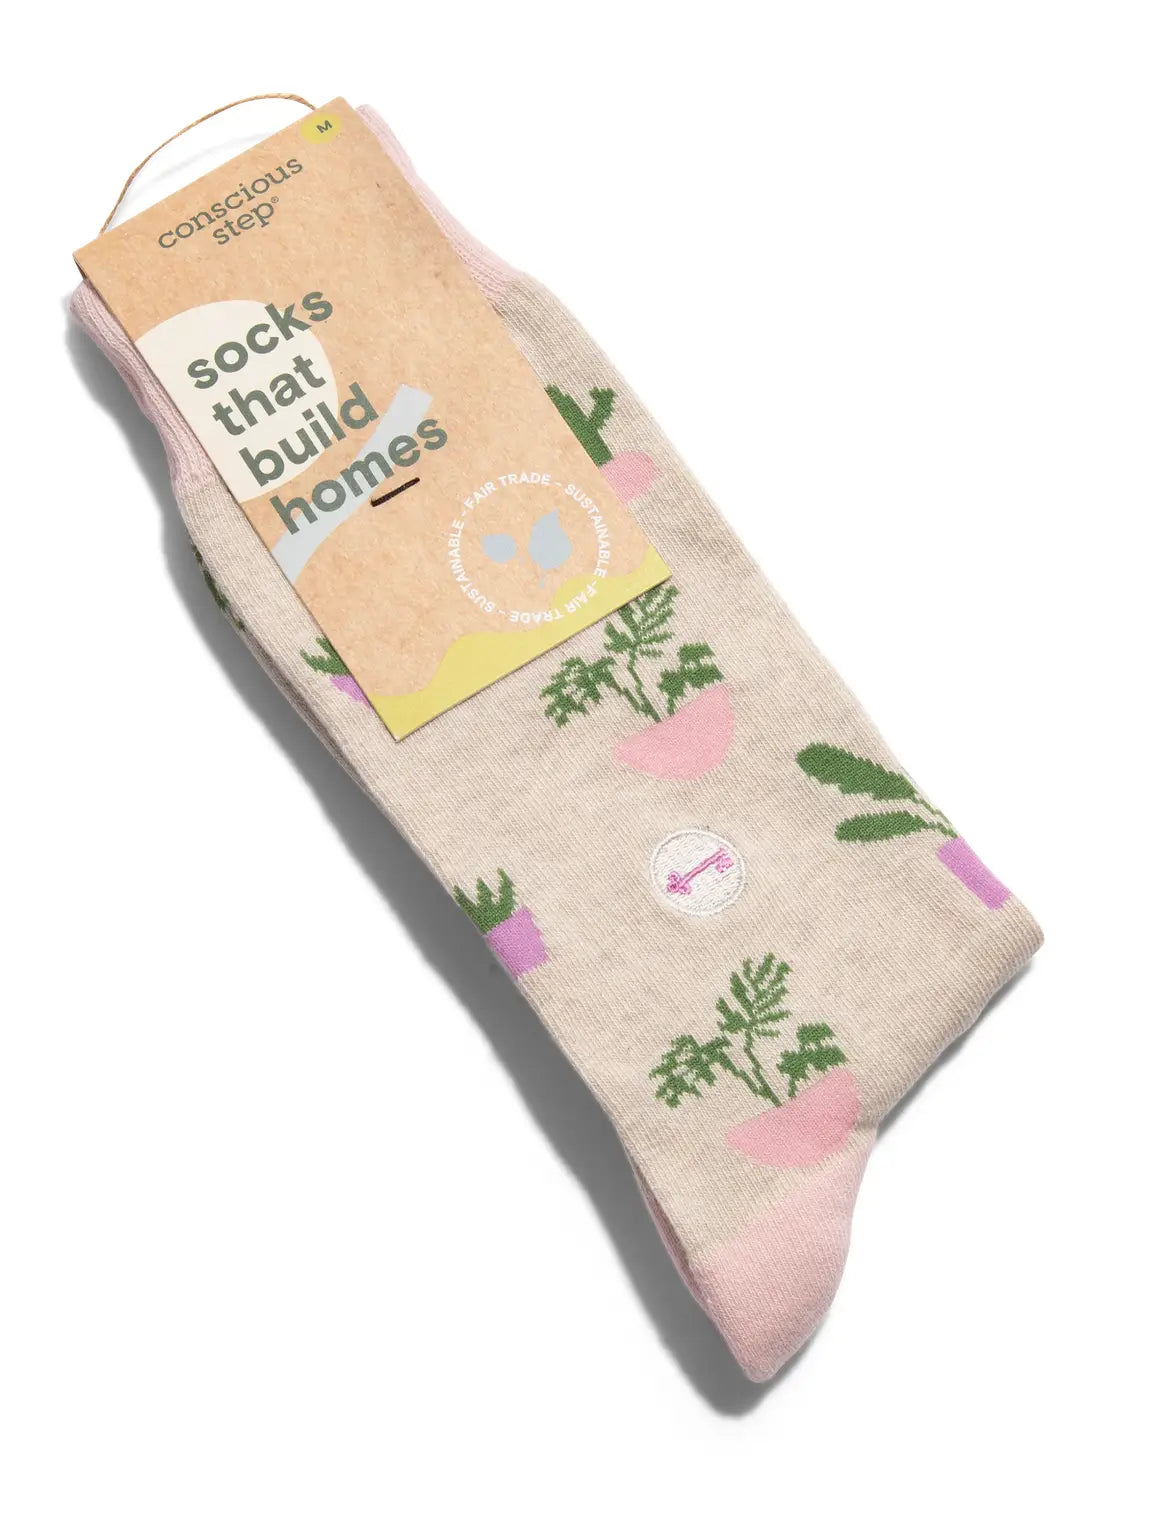 Socks that Build Homes - Pink Taupe With Plants